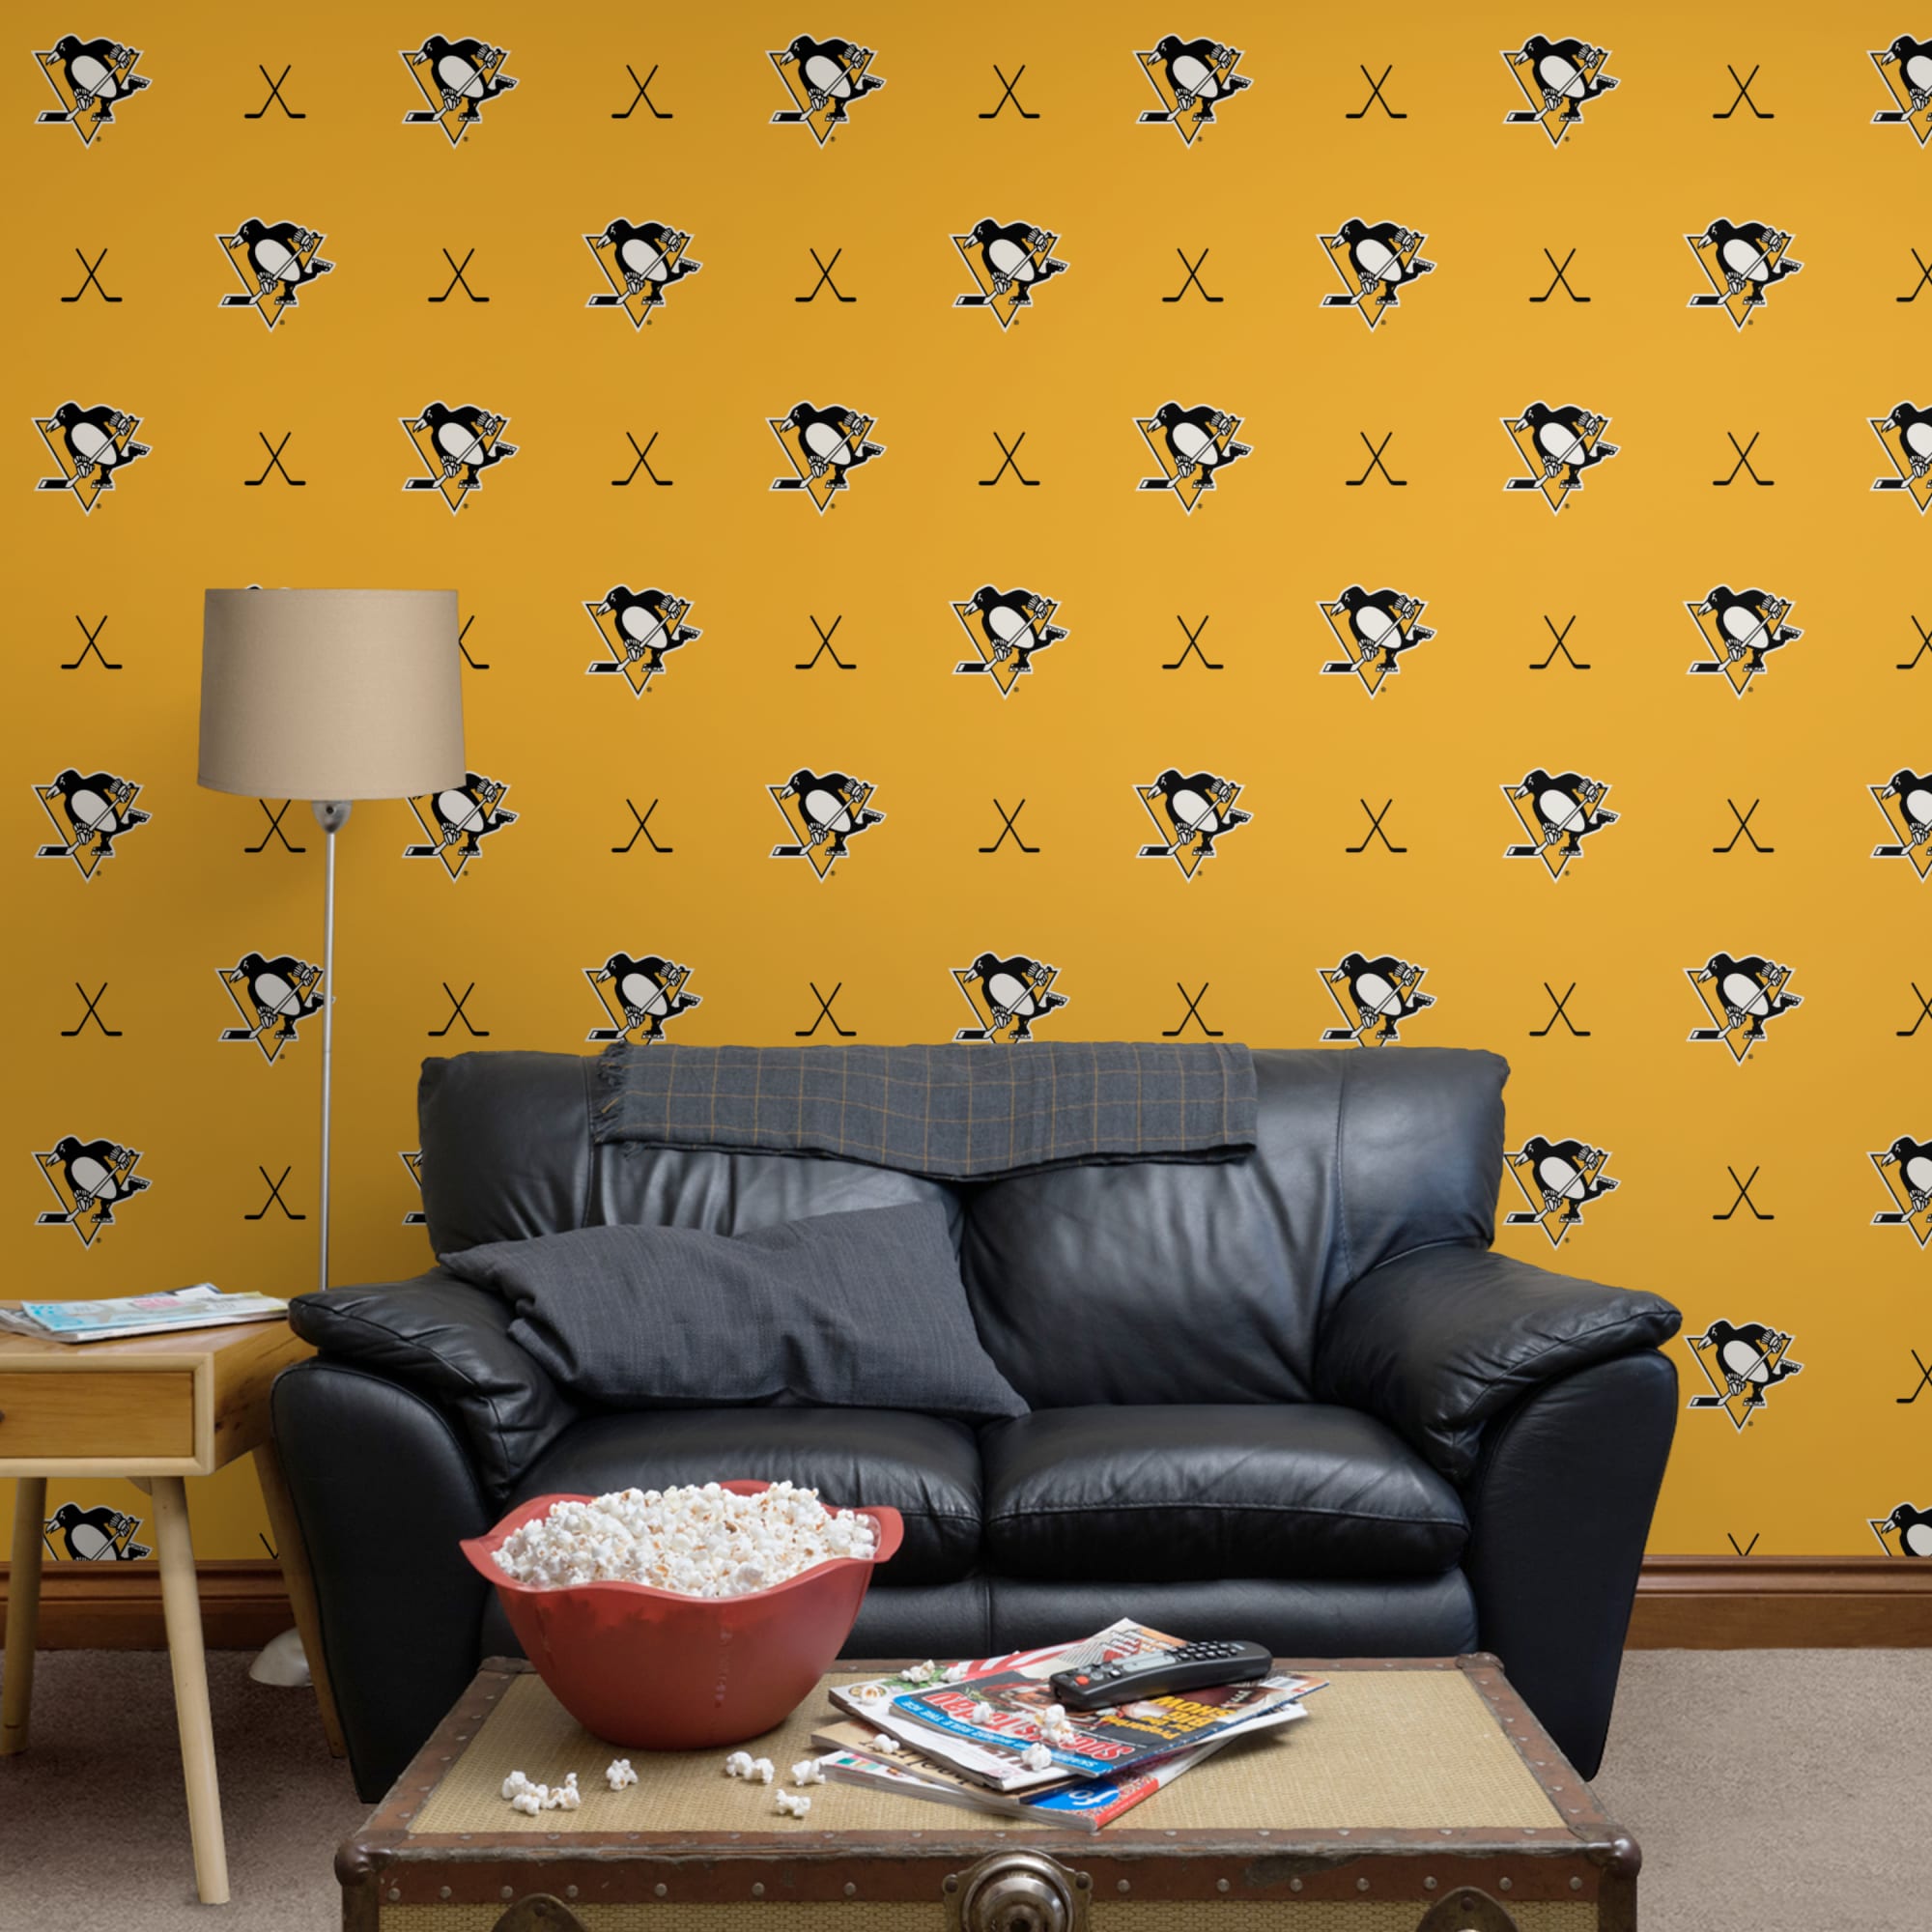 Pittsburgh Penguins: Sticks Pattern - Officially Licensed NHL Removable Wallpaper 12" x 12" Sample by Fathead